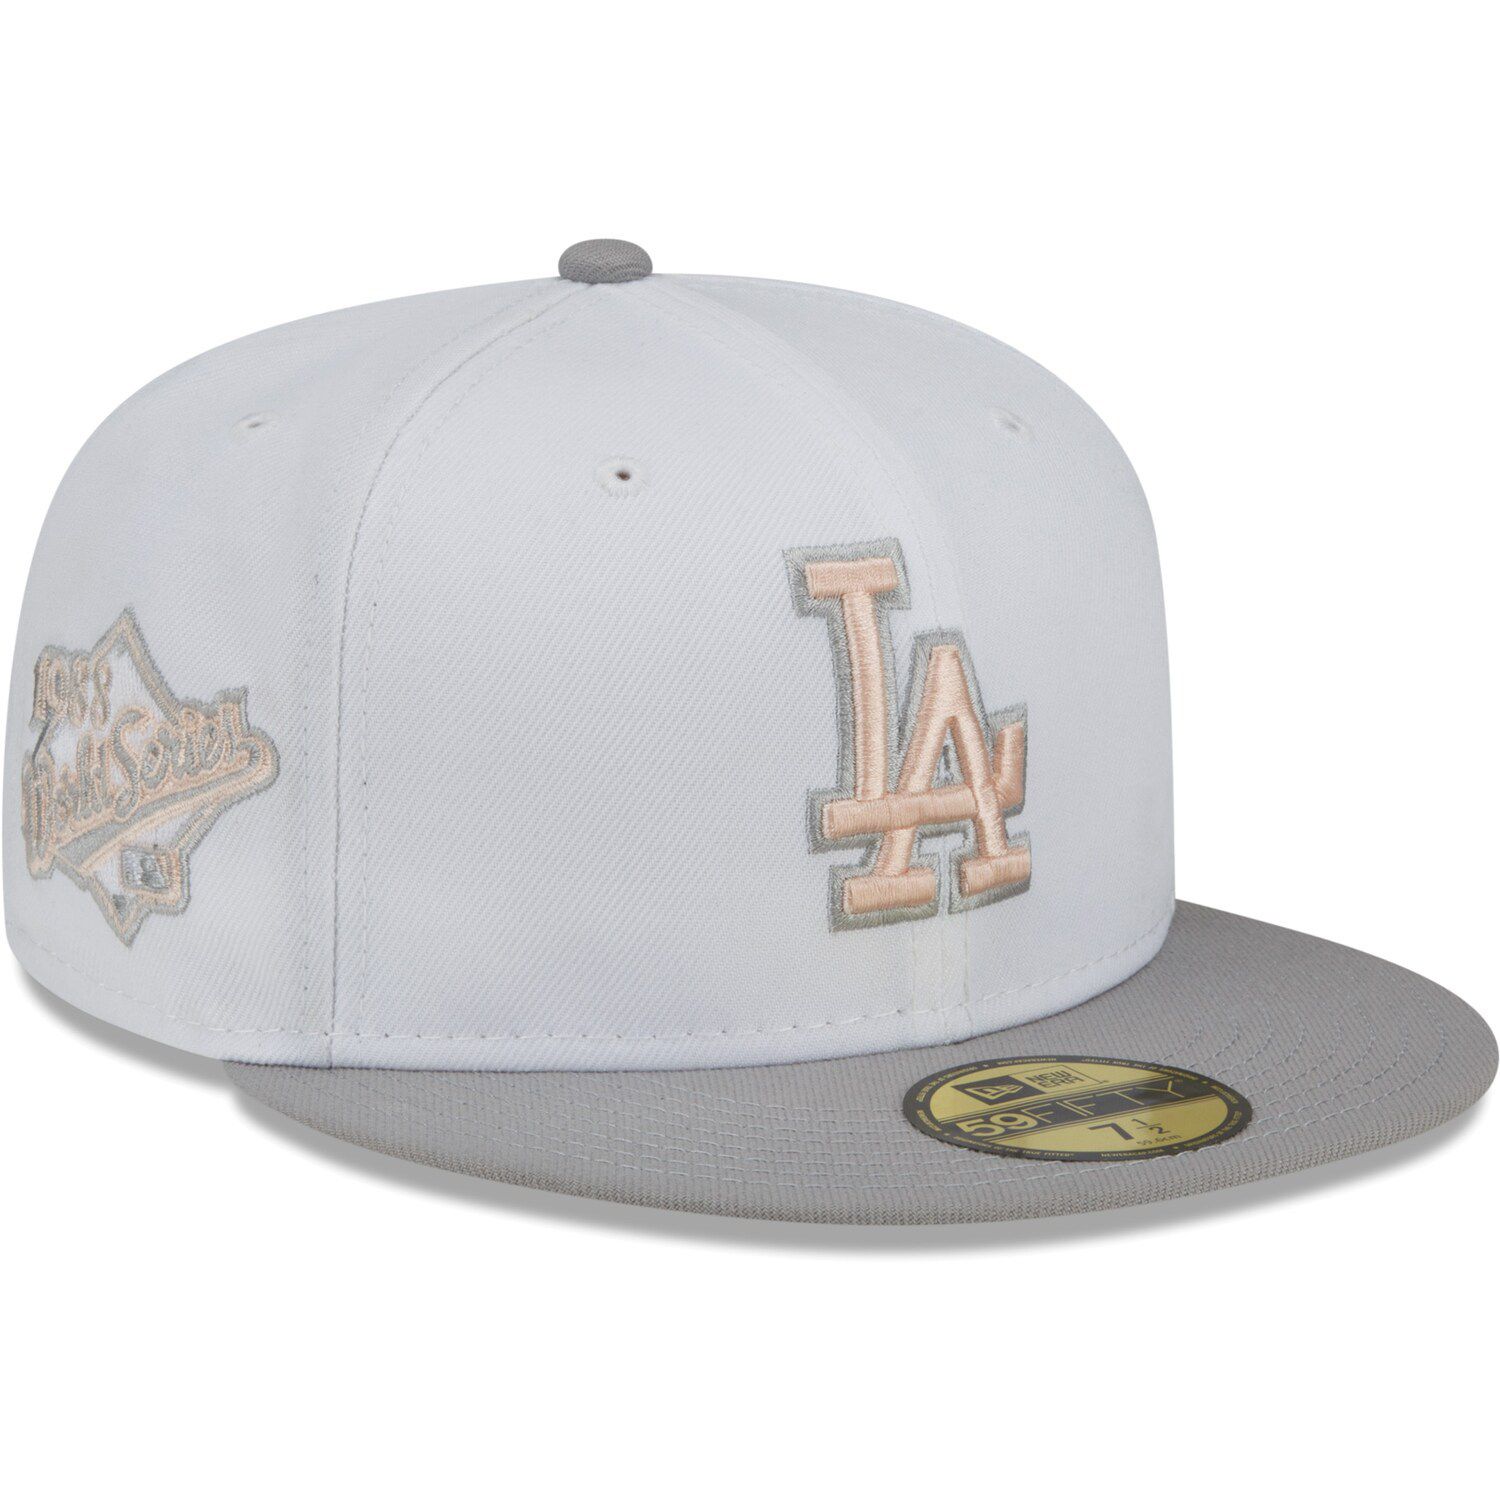 Men's New Era Royal Los Angeles Dodgers 9/11 Memorial Side Patch 59FIFTY Fitted Hat